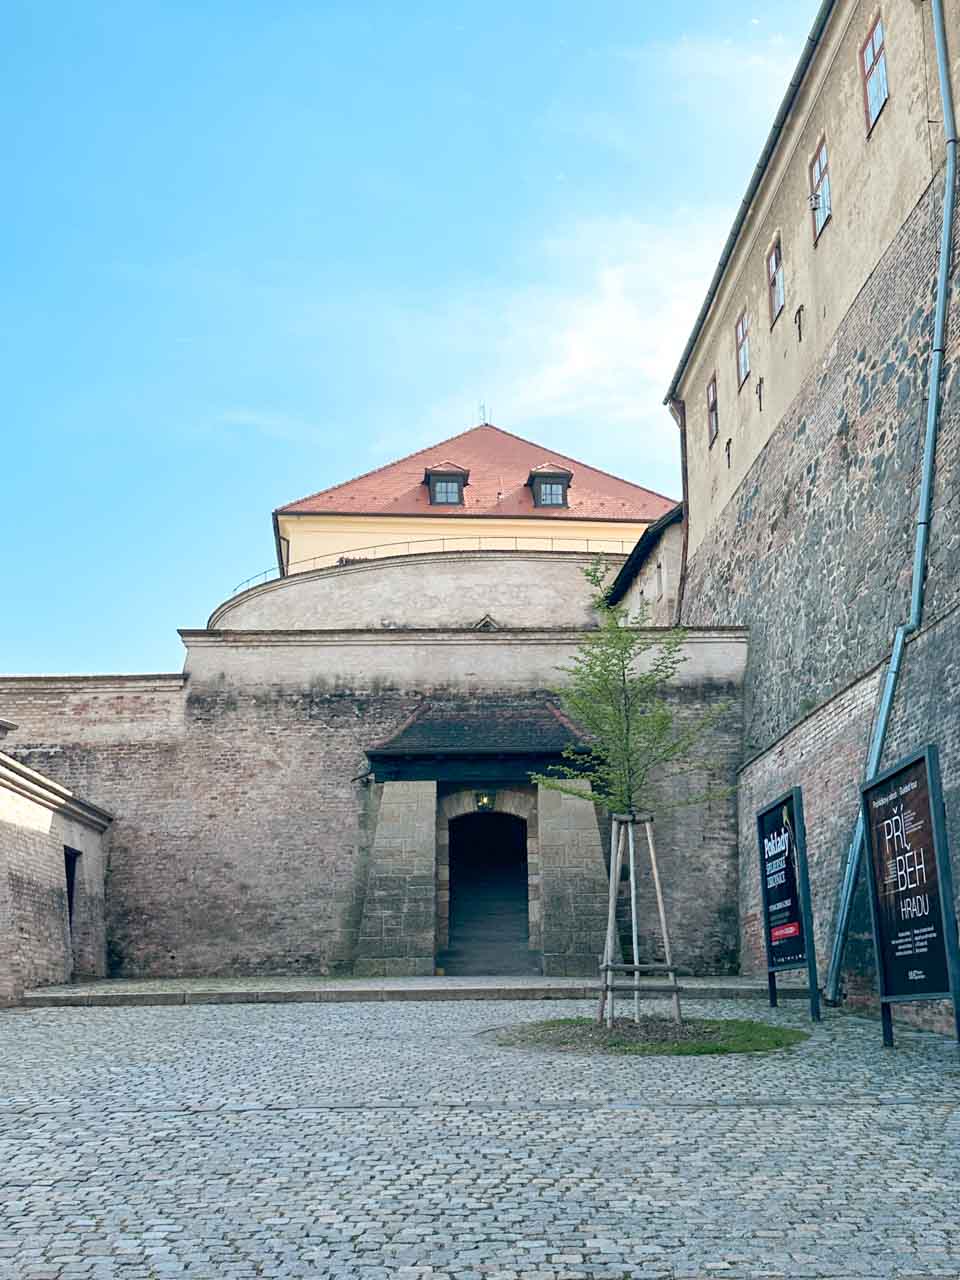 A historic courtyard inside the Špilberk Castle in Brno, Czech Republic with cobblestone and an archway entrance